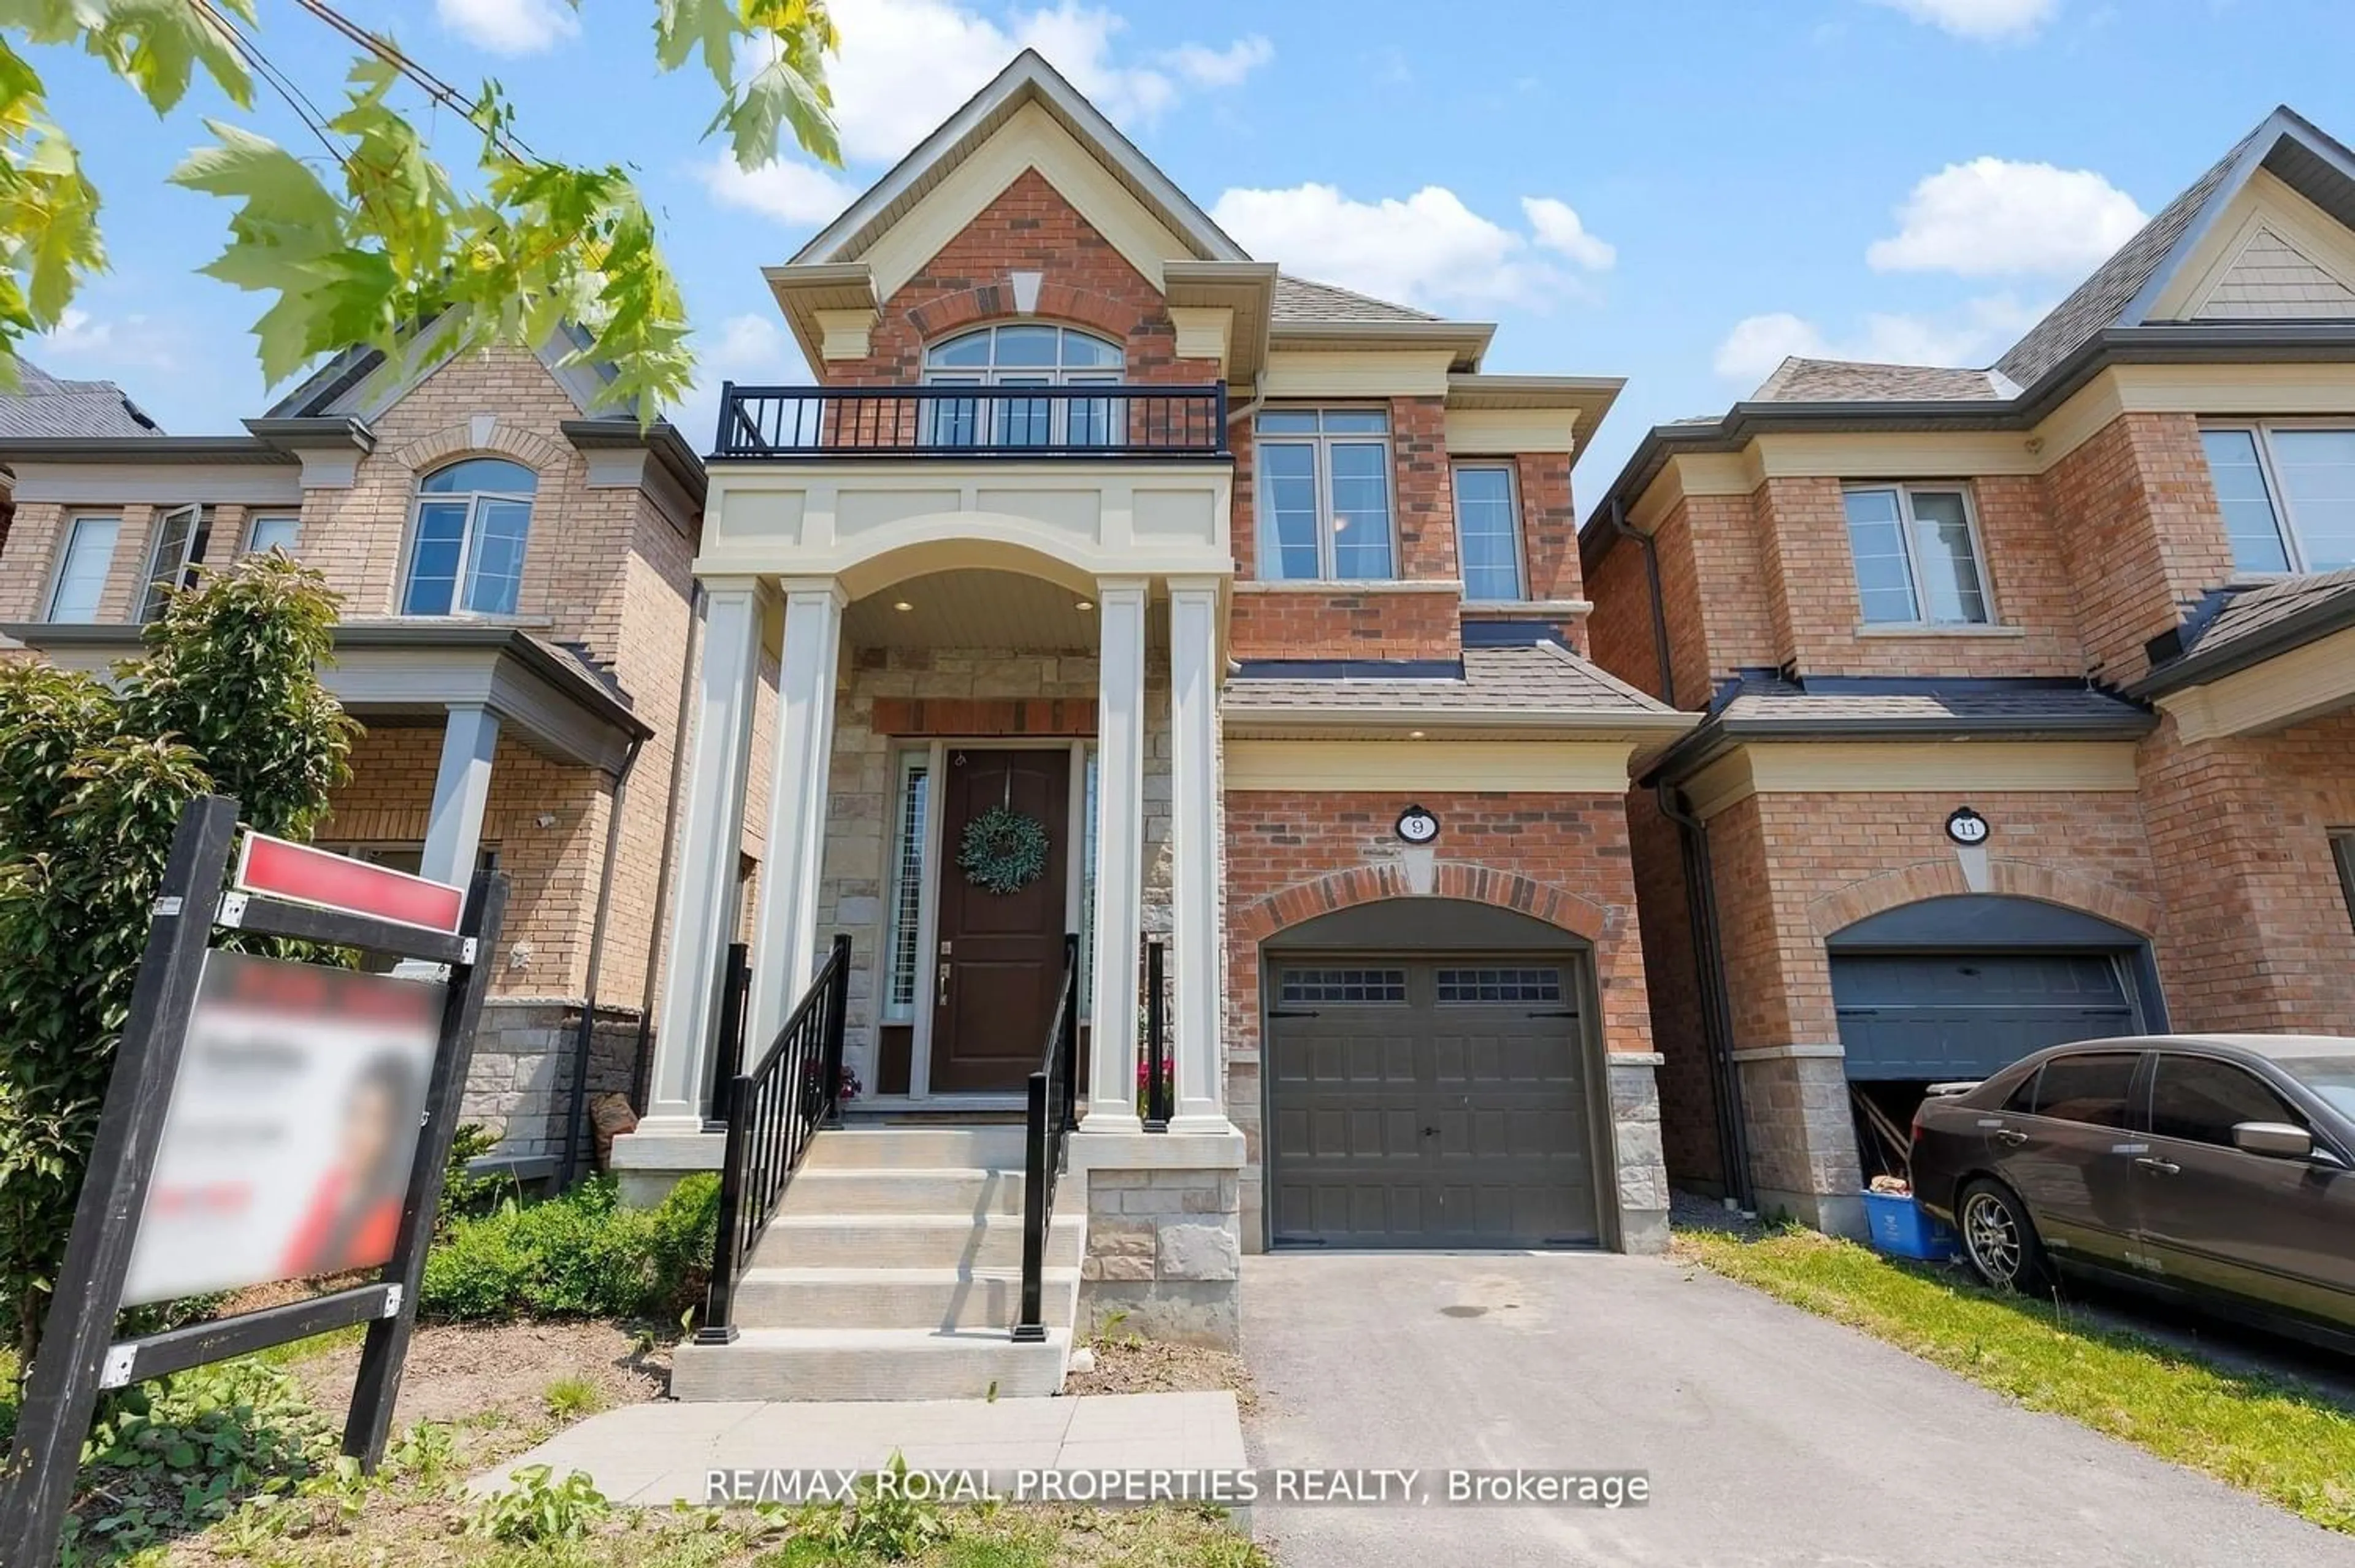 Home with brick exterior material for 9 Gillivary Dr, Whitby Ontario L1P 0C9